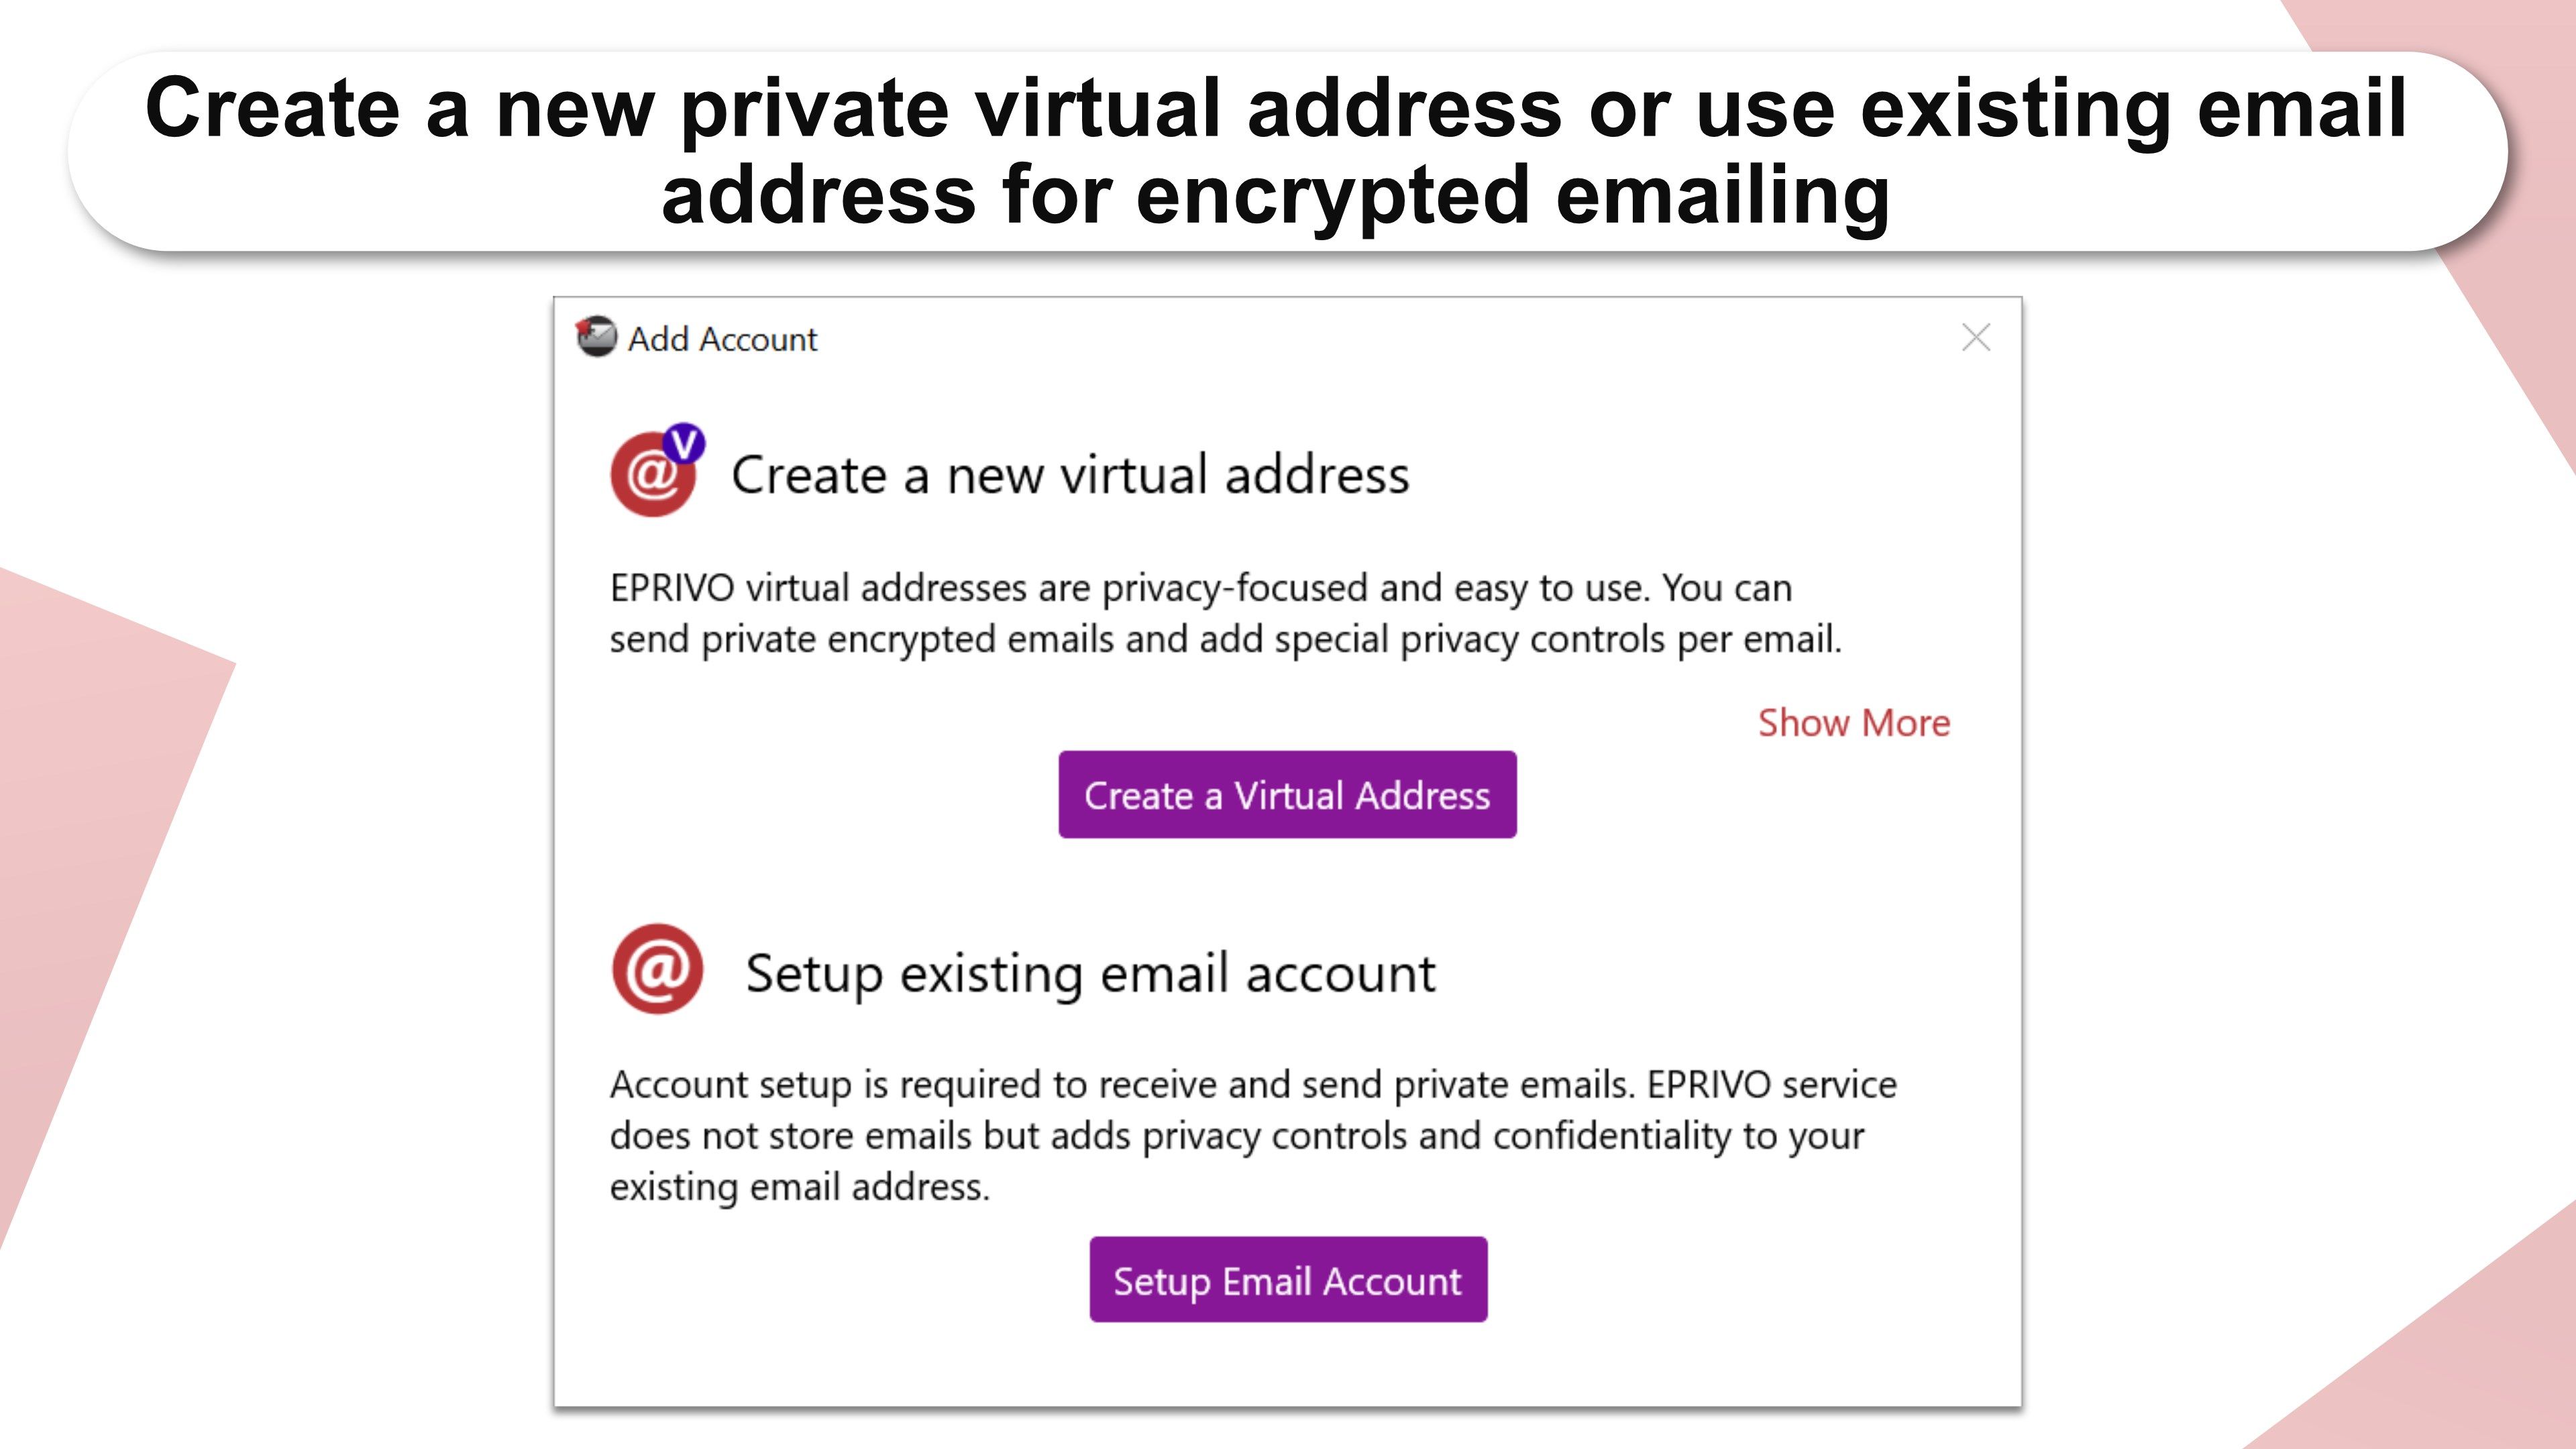 Create a new private virtual address or use existing email address for encrypted emailing